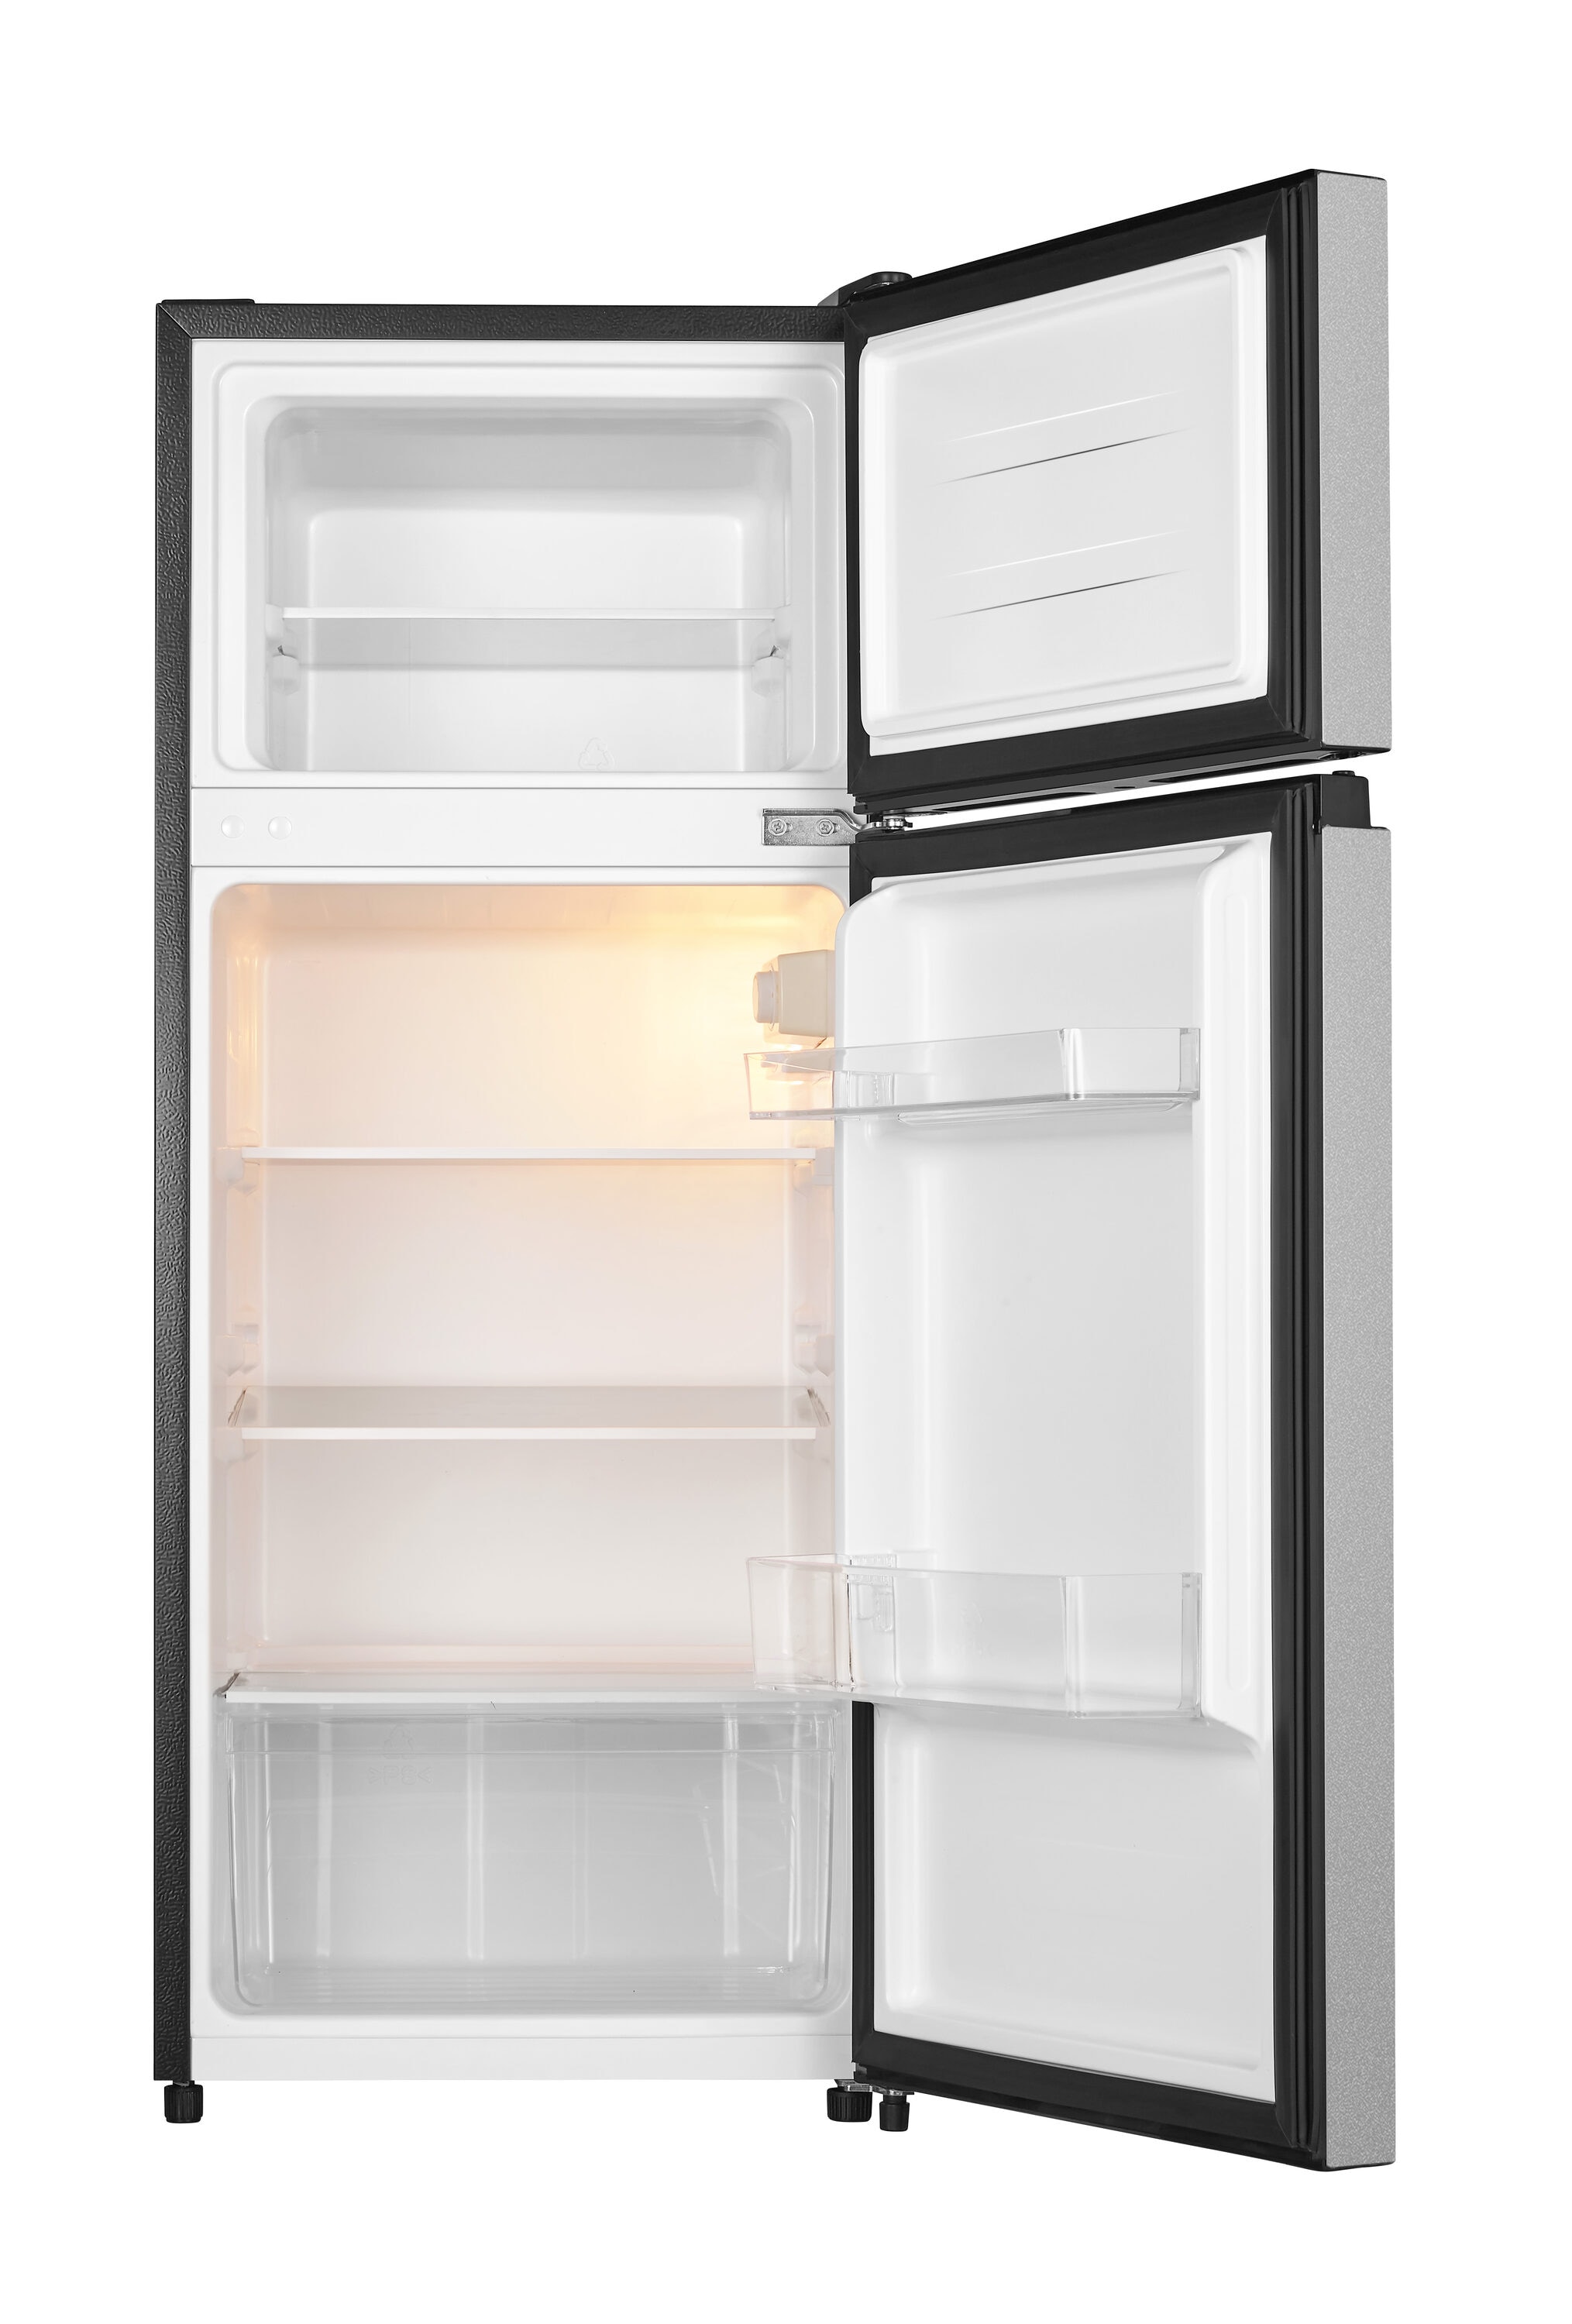 MARVEL 4.9-cu ft Built-In Mini Fridge Freezer Compartment (Stainless Steel)  ENERGY STAR at